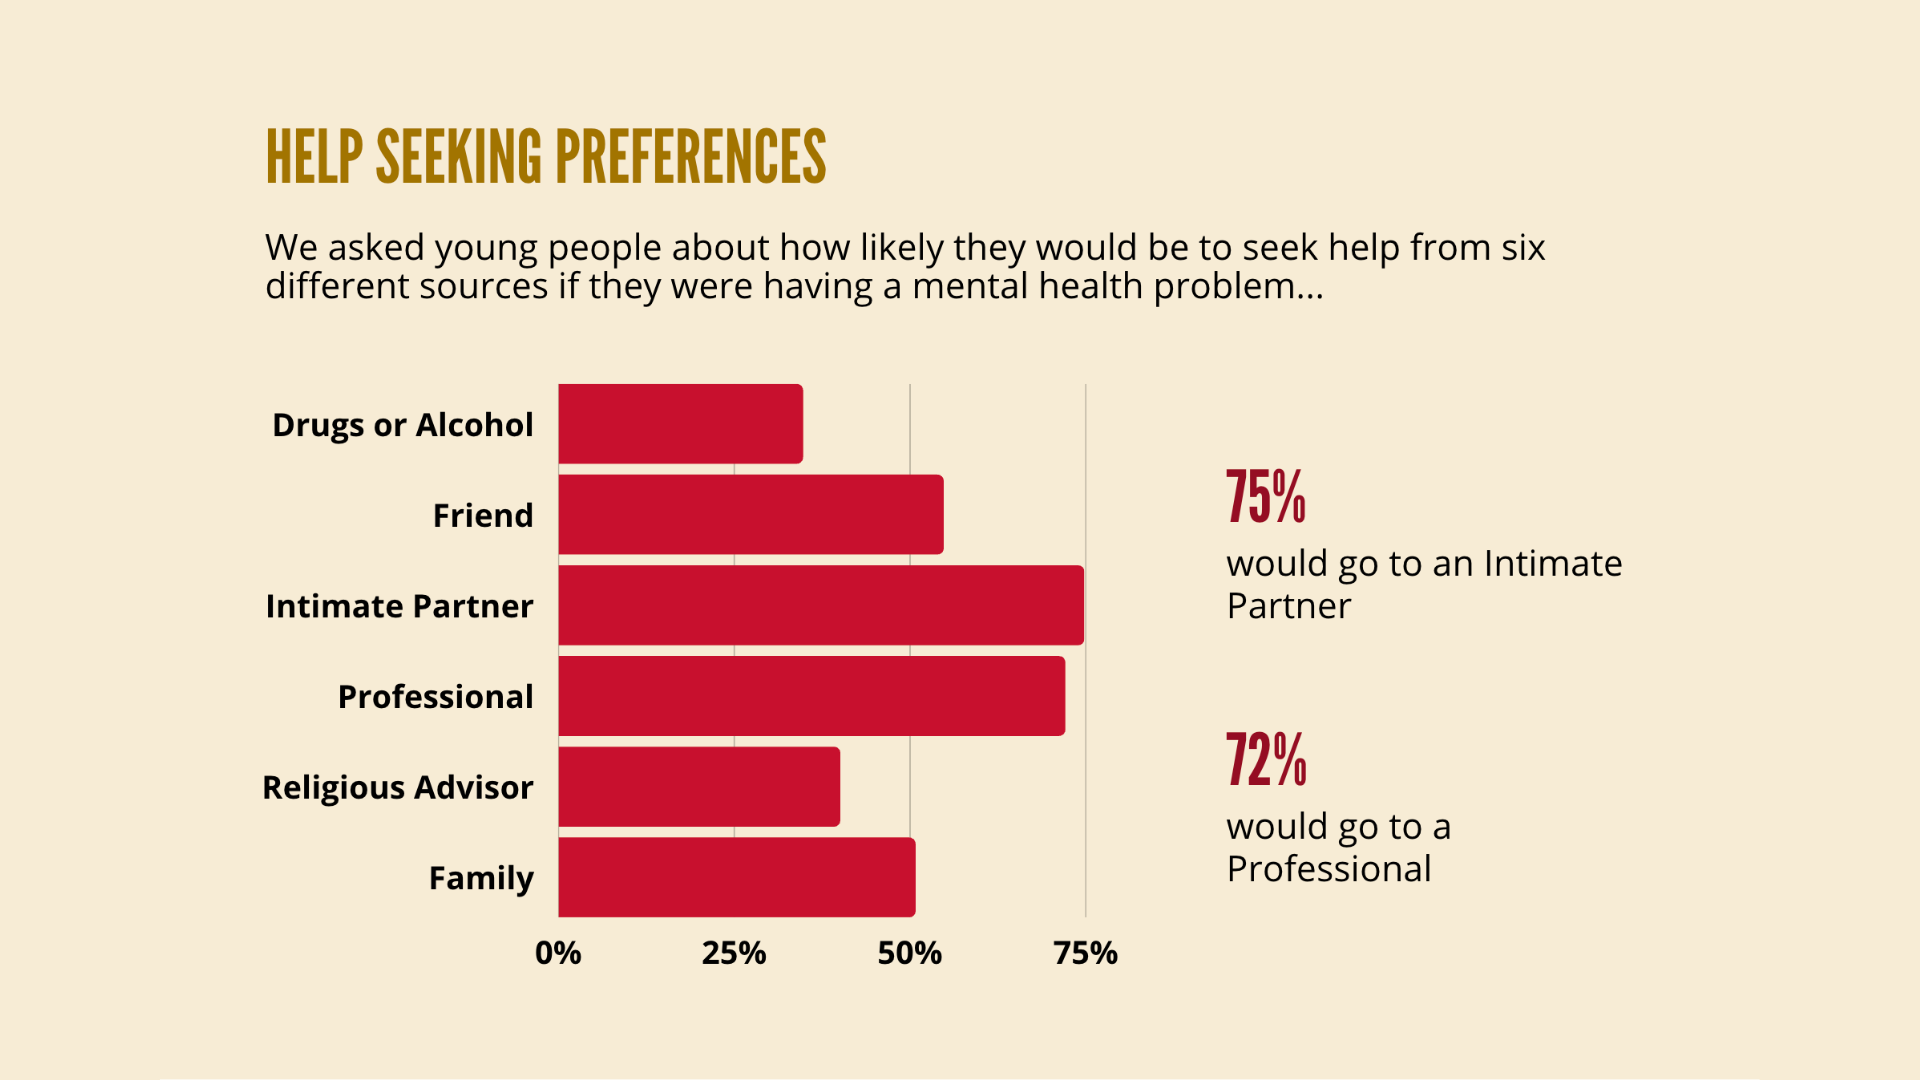 We asked young people about how likely they would be to seek help from six different sources if they were having a mental health problem. 75% would go to an intimate partner. 72% would go to a professional. 